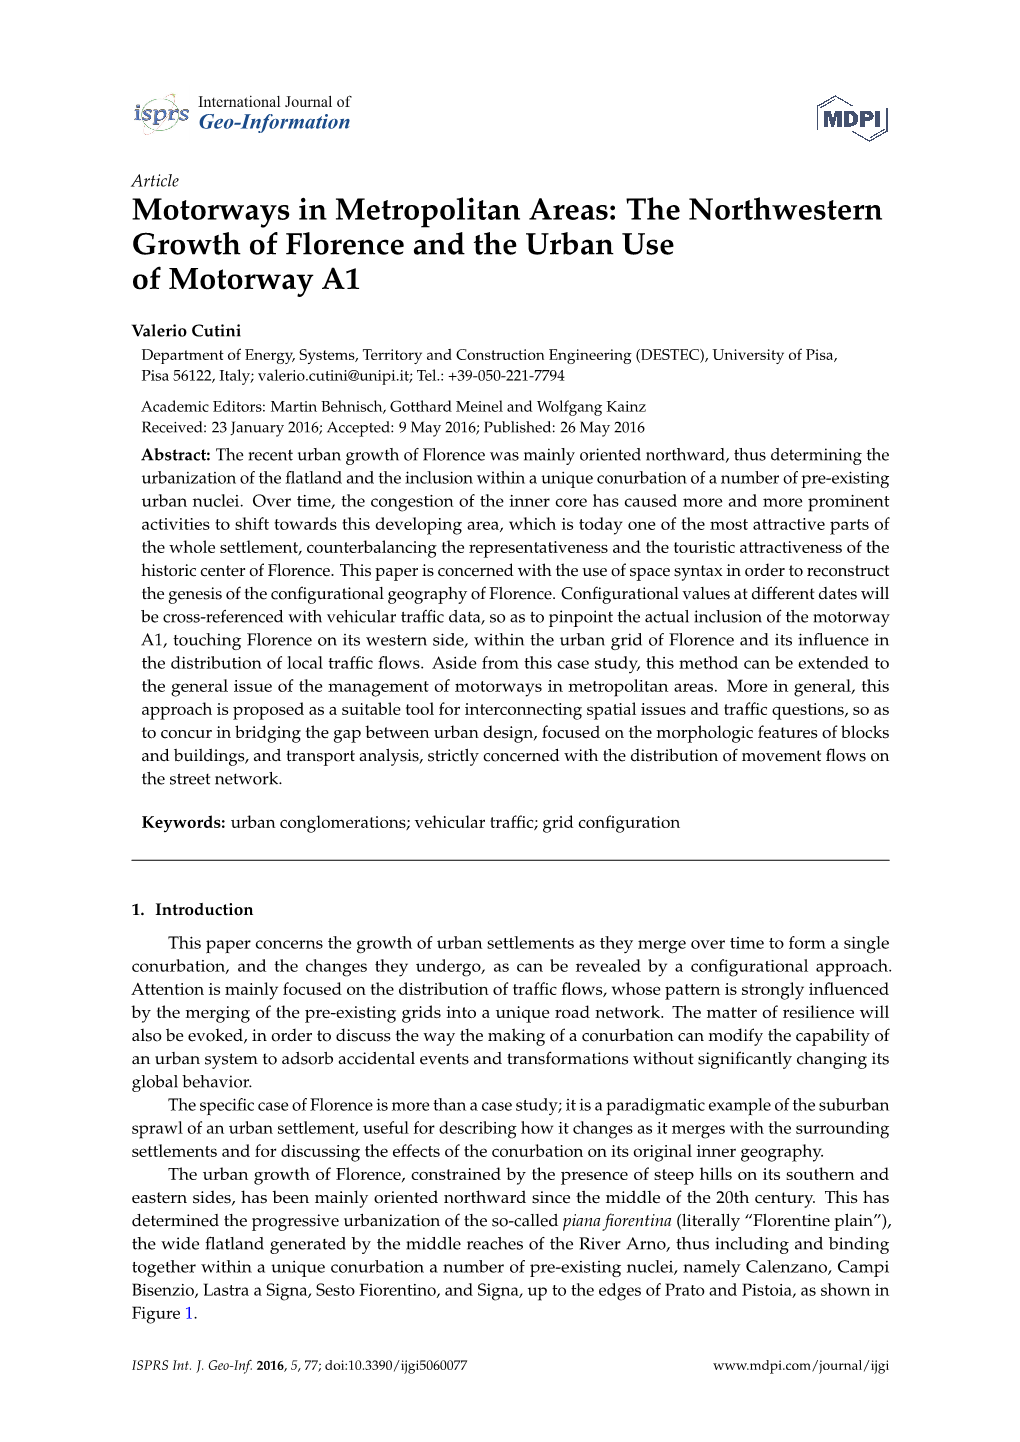 The Northwestern Growth of Florence and the Urban Use of Motorway A1